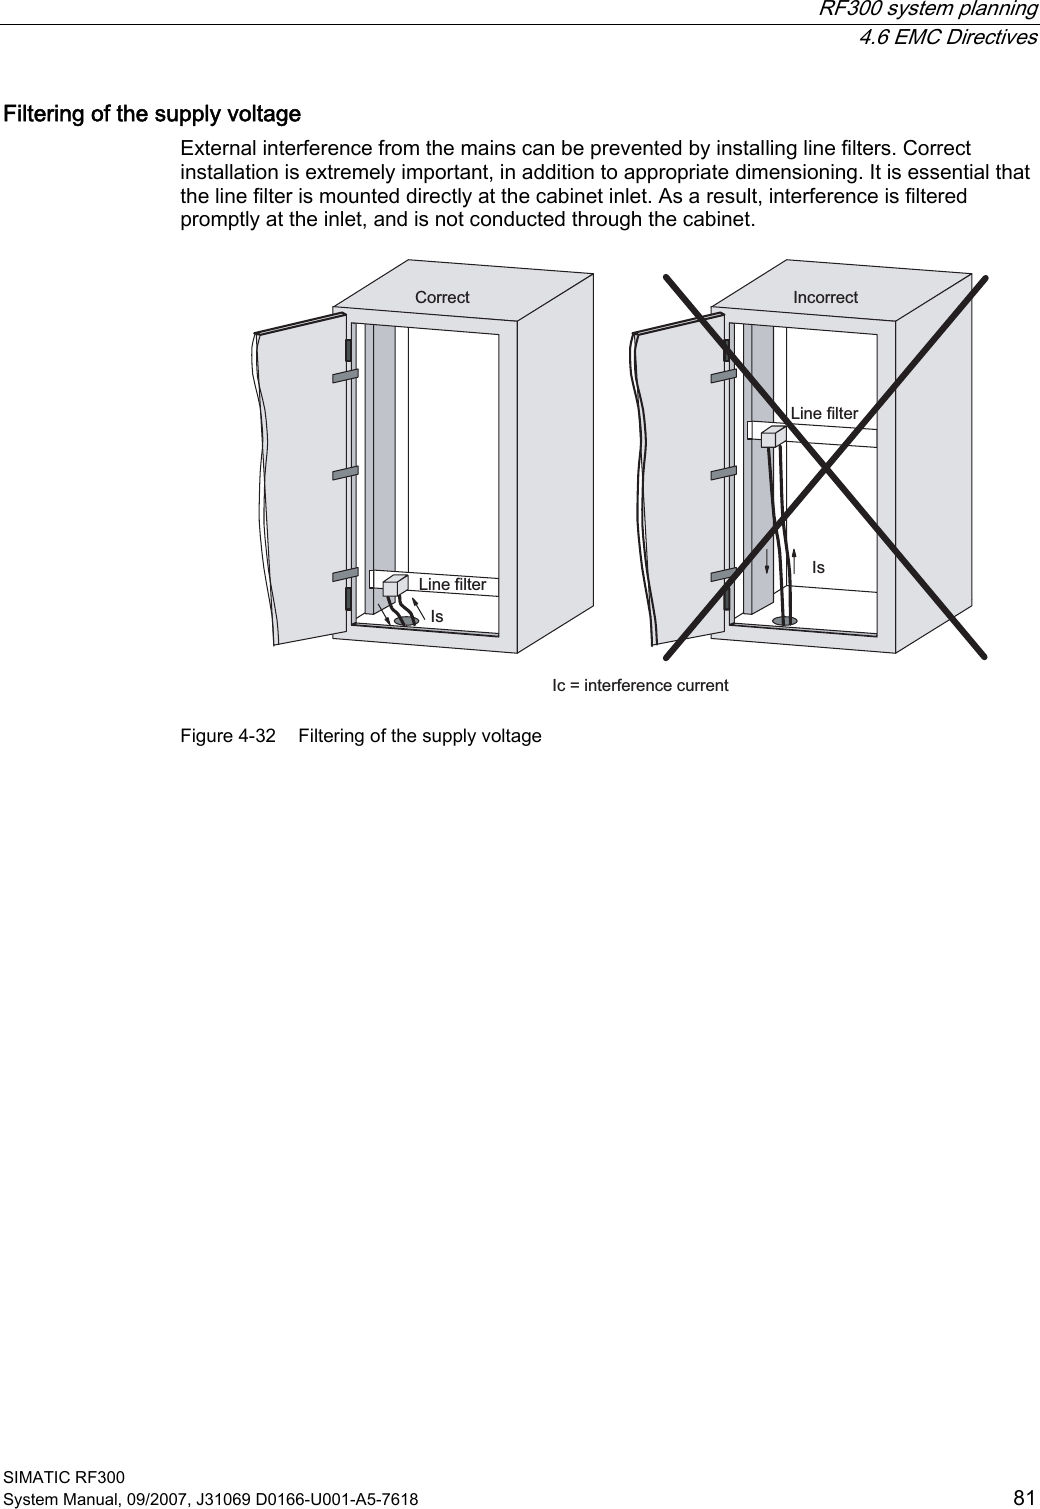  RF300 system planning  4.6 EMC Directives SIMATIC RF300 System Manual, 09/2007, J31069 D0166-U001-A5-7618  81 Filtering of the supply voltage External interference from the mains can be prevented by installing line filters. Correct installation is extremely important, in addition to appropriate dimensioning. It is essential that the line filter is mounted directly at the cabinet inlet. As a result, interference is filtered promptly at the inlet, and is not conducted through the cabinet. /LQHILOWHU,V&amp;RUUHFW/LQHILOWHU,QFRUUHFW,F LQWHUIHUHQFHFXUUHQW,V Figure 4-32  Filtering of the supply voltage  